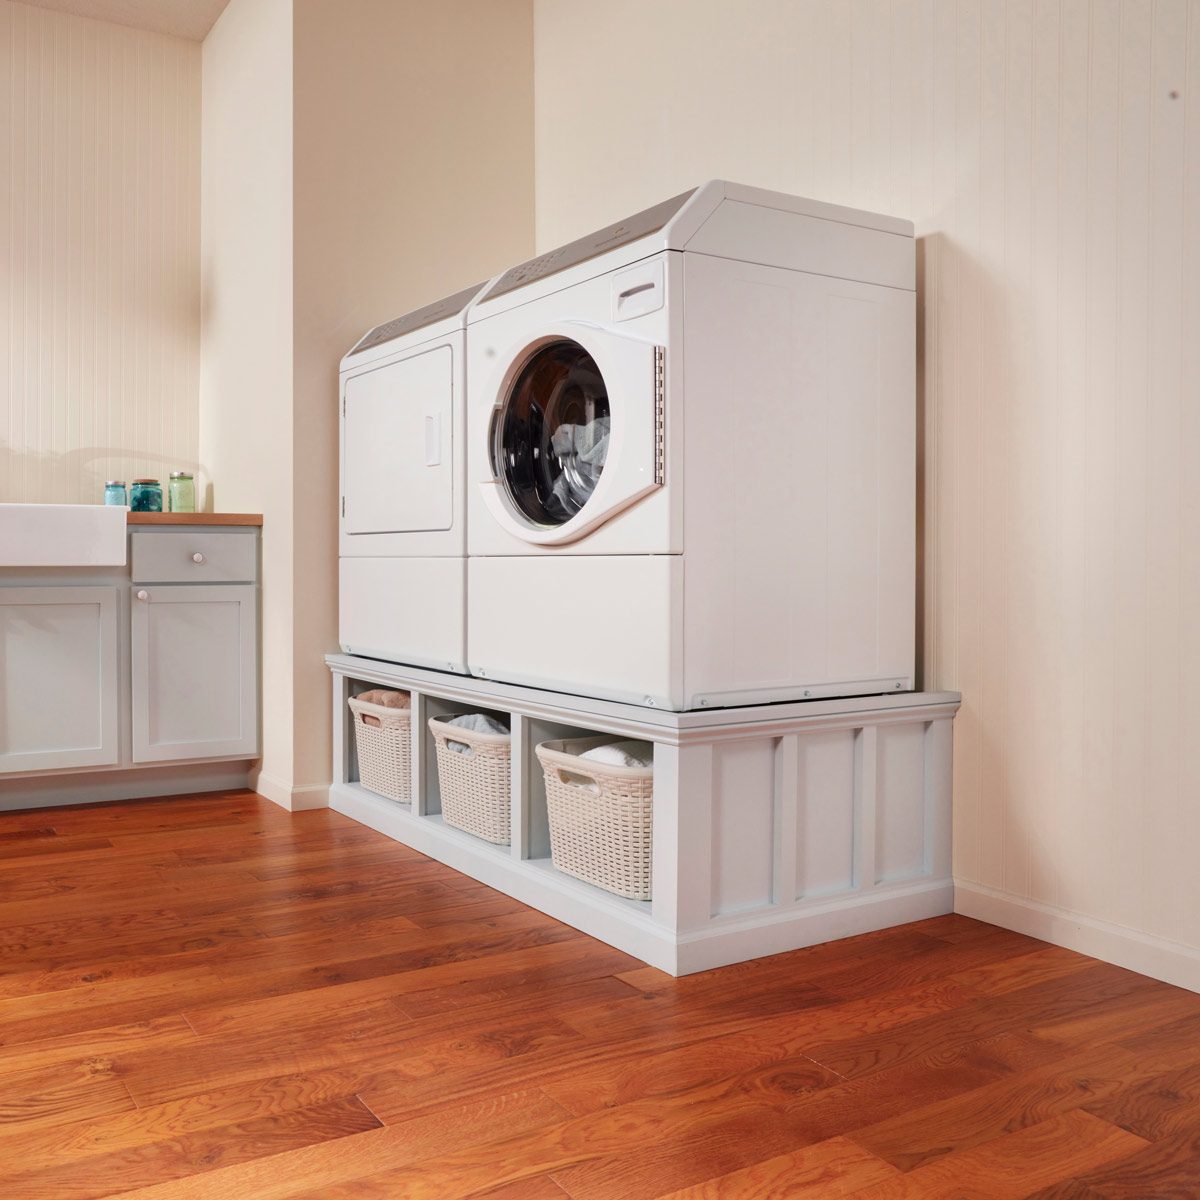 How to Build a Laundry Room Pedestal